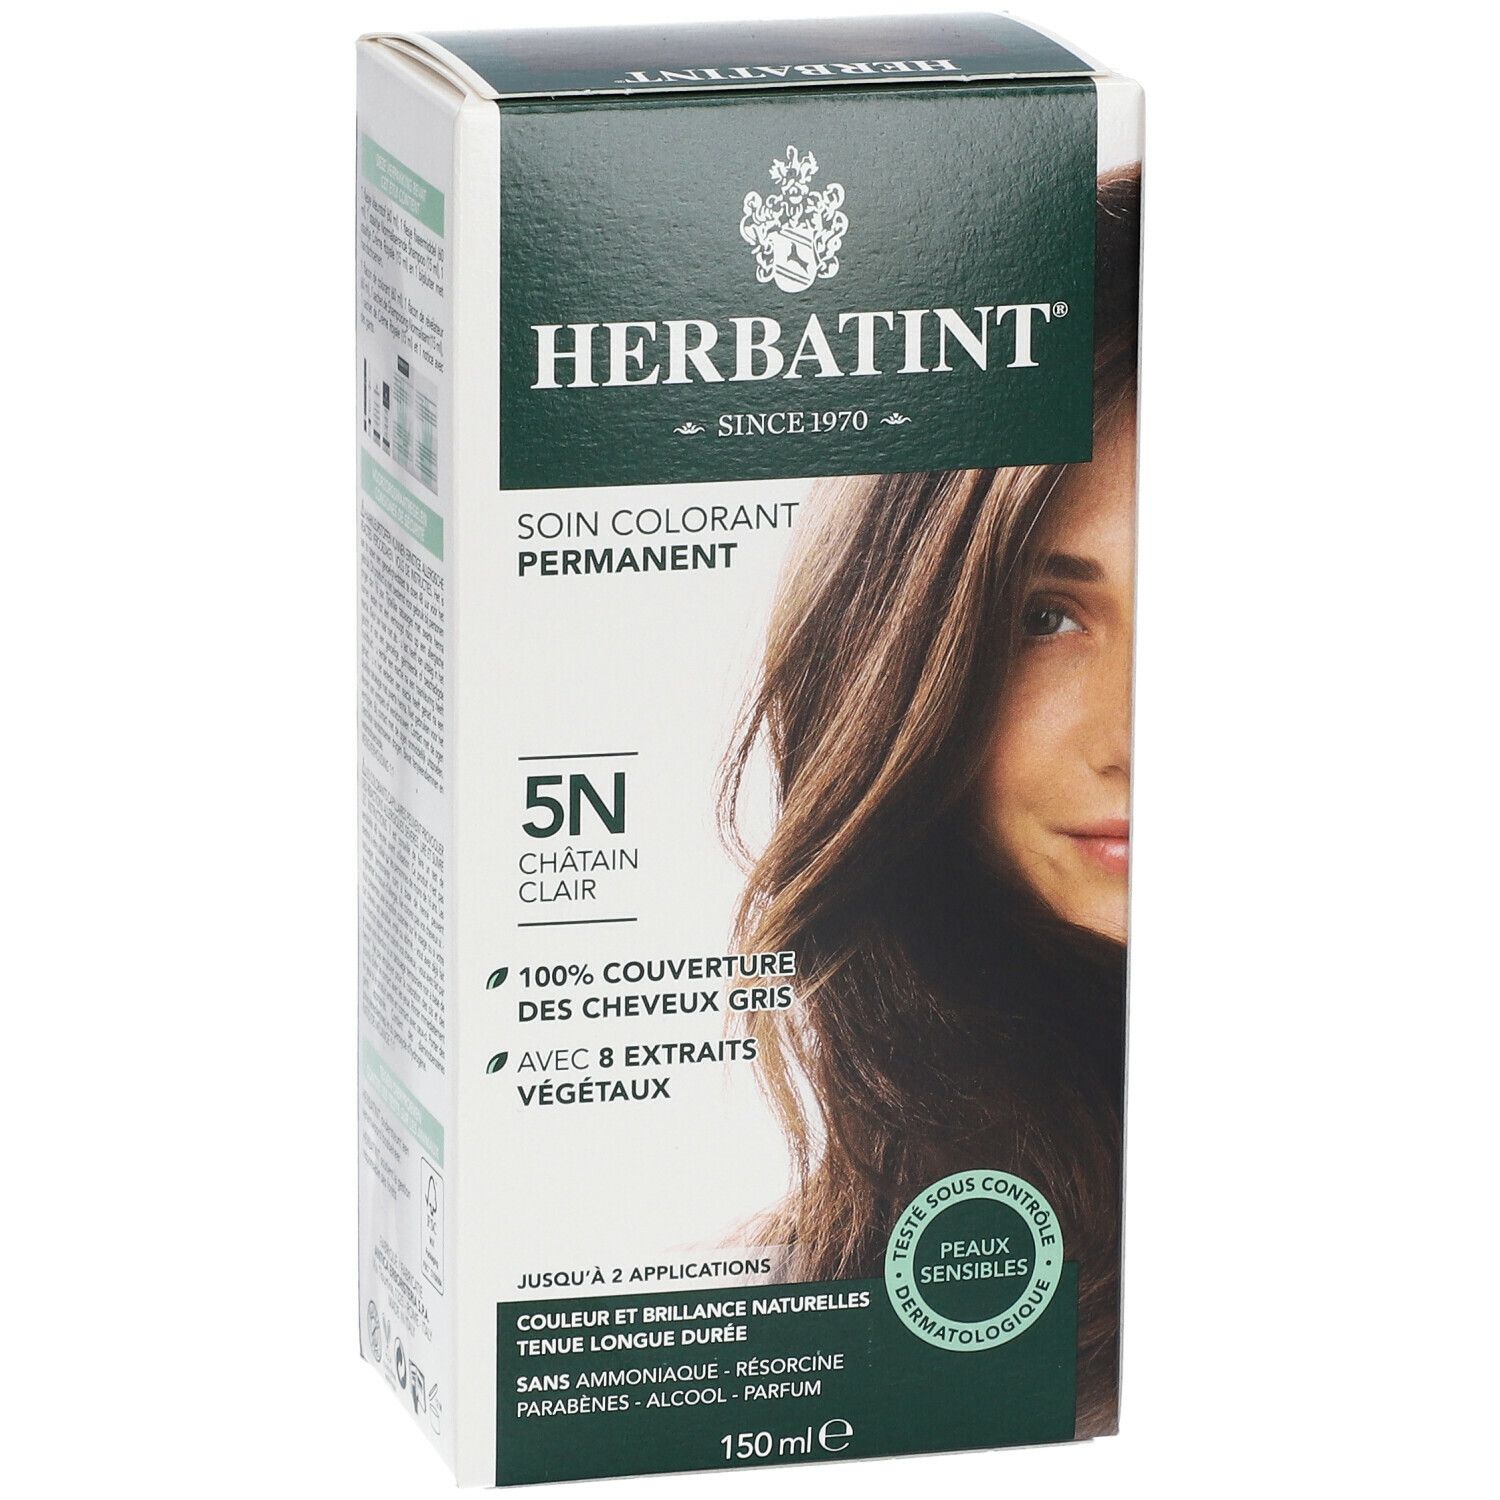 Herbatint Soin colorant permanent Châtain clair 5N